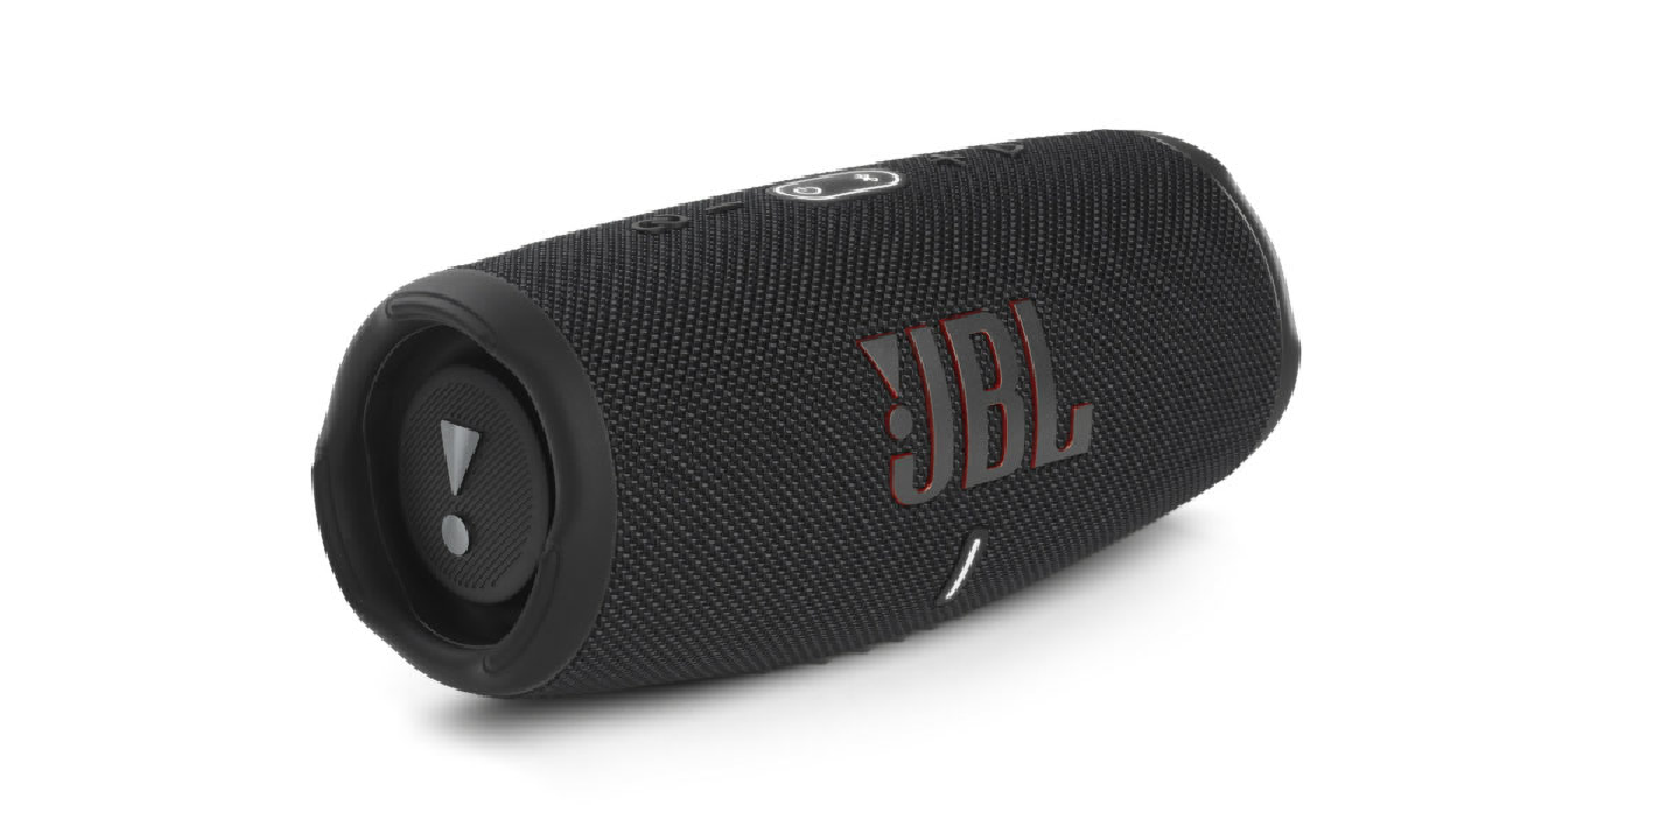 The New JBL Charge 5 Bluetooth Speaker Is Arriving in April 2021